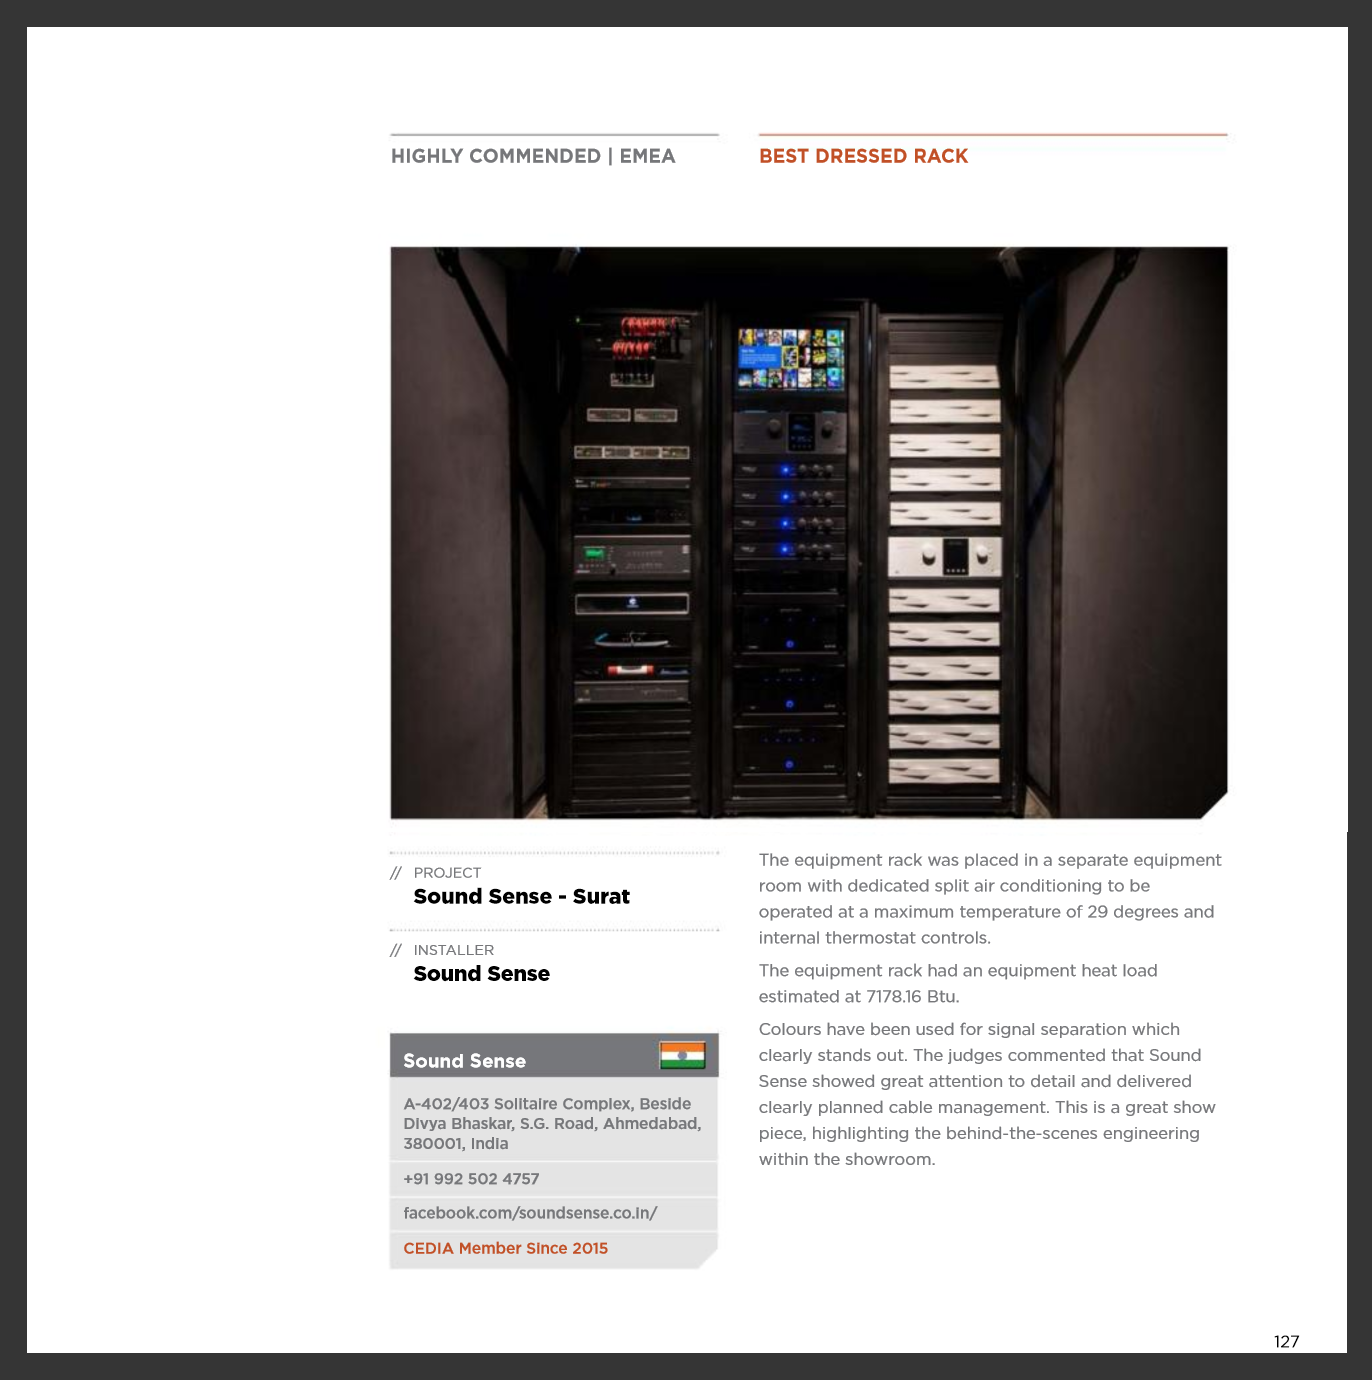 CEDIA-Highly Commended-Best Dressed Rack-EMEA.png